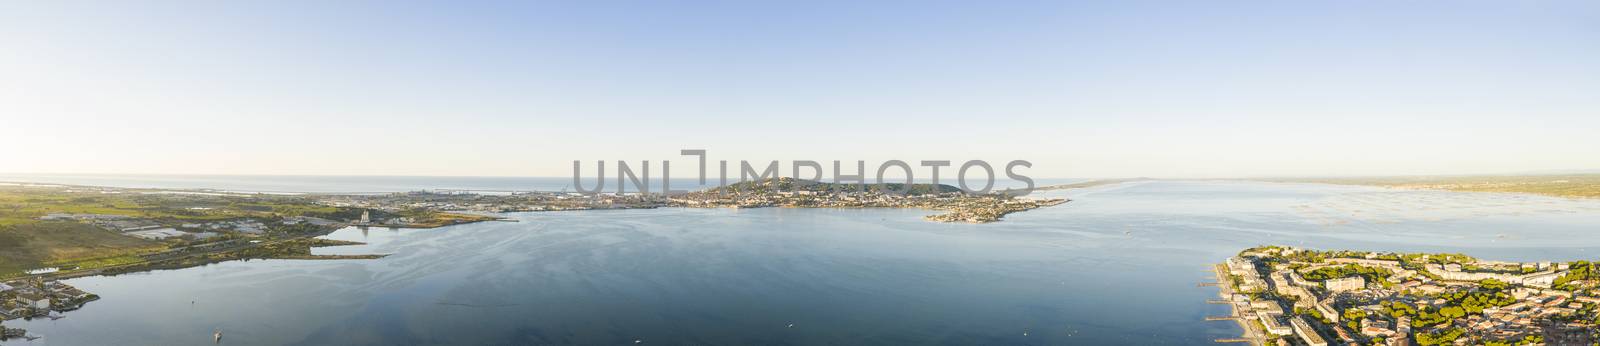 Aerial panorama of Sète and Thau Basin from Balaruc in Occitania, France by Frederic